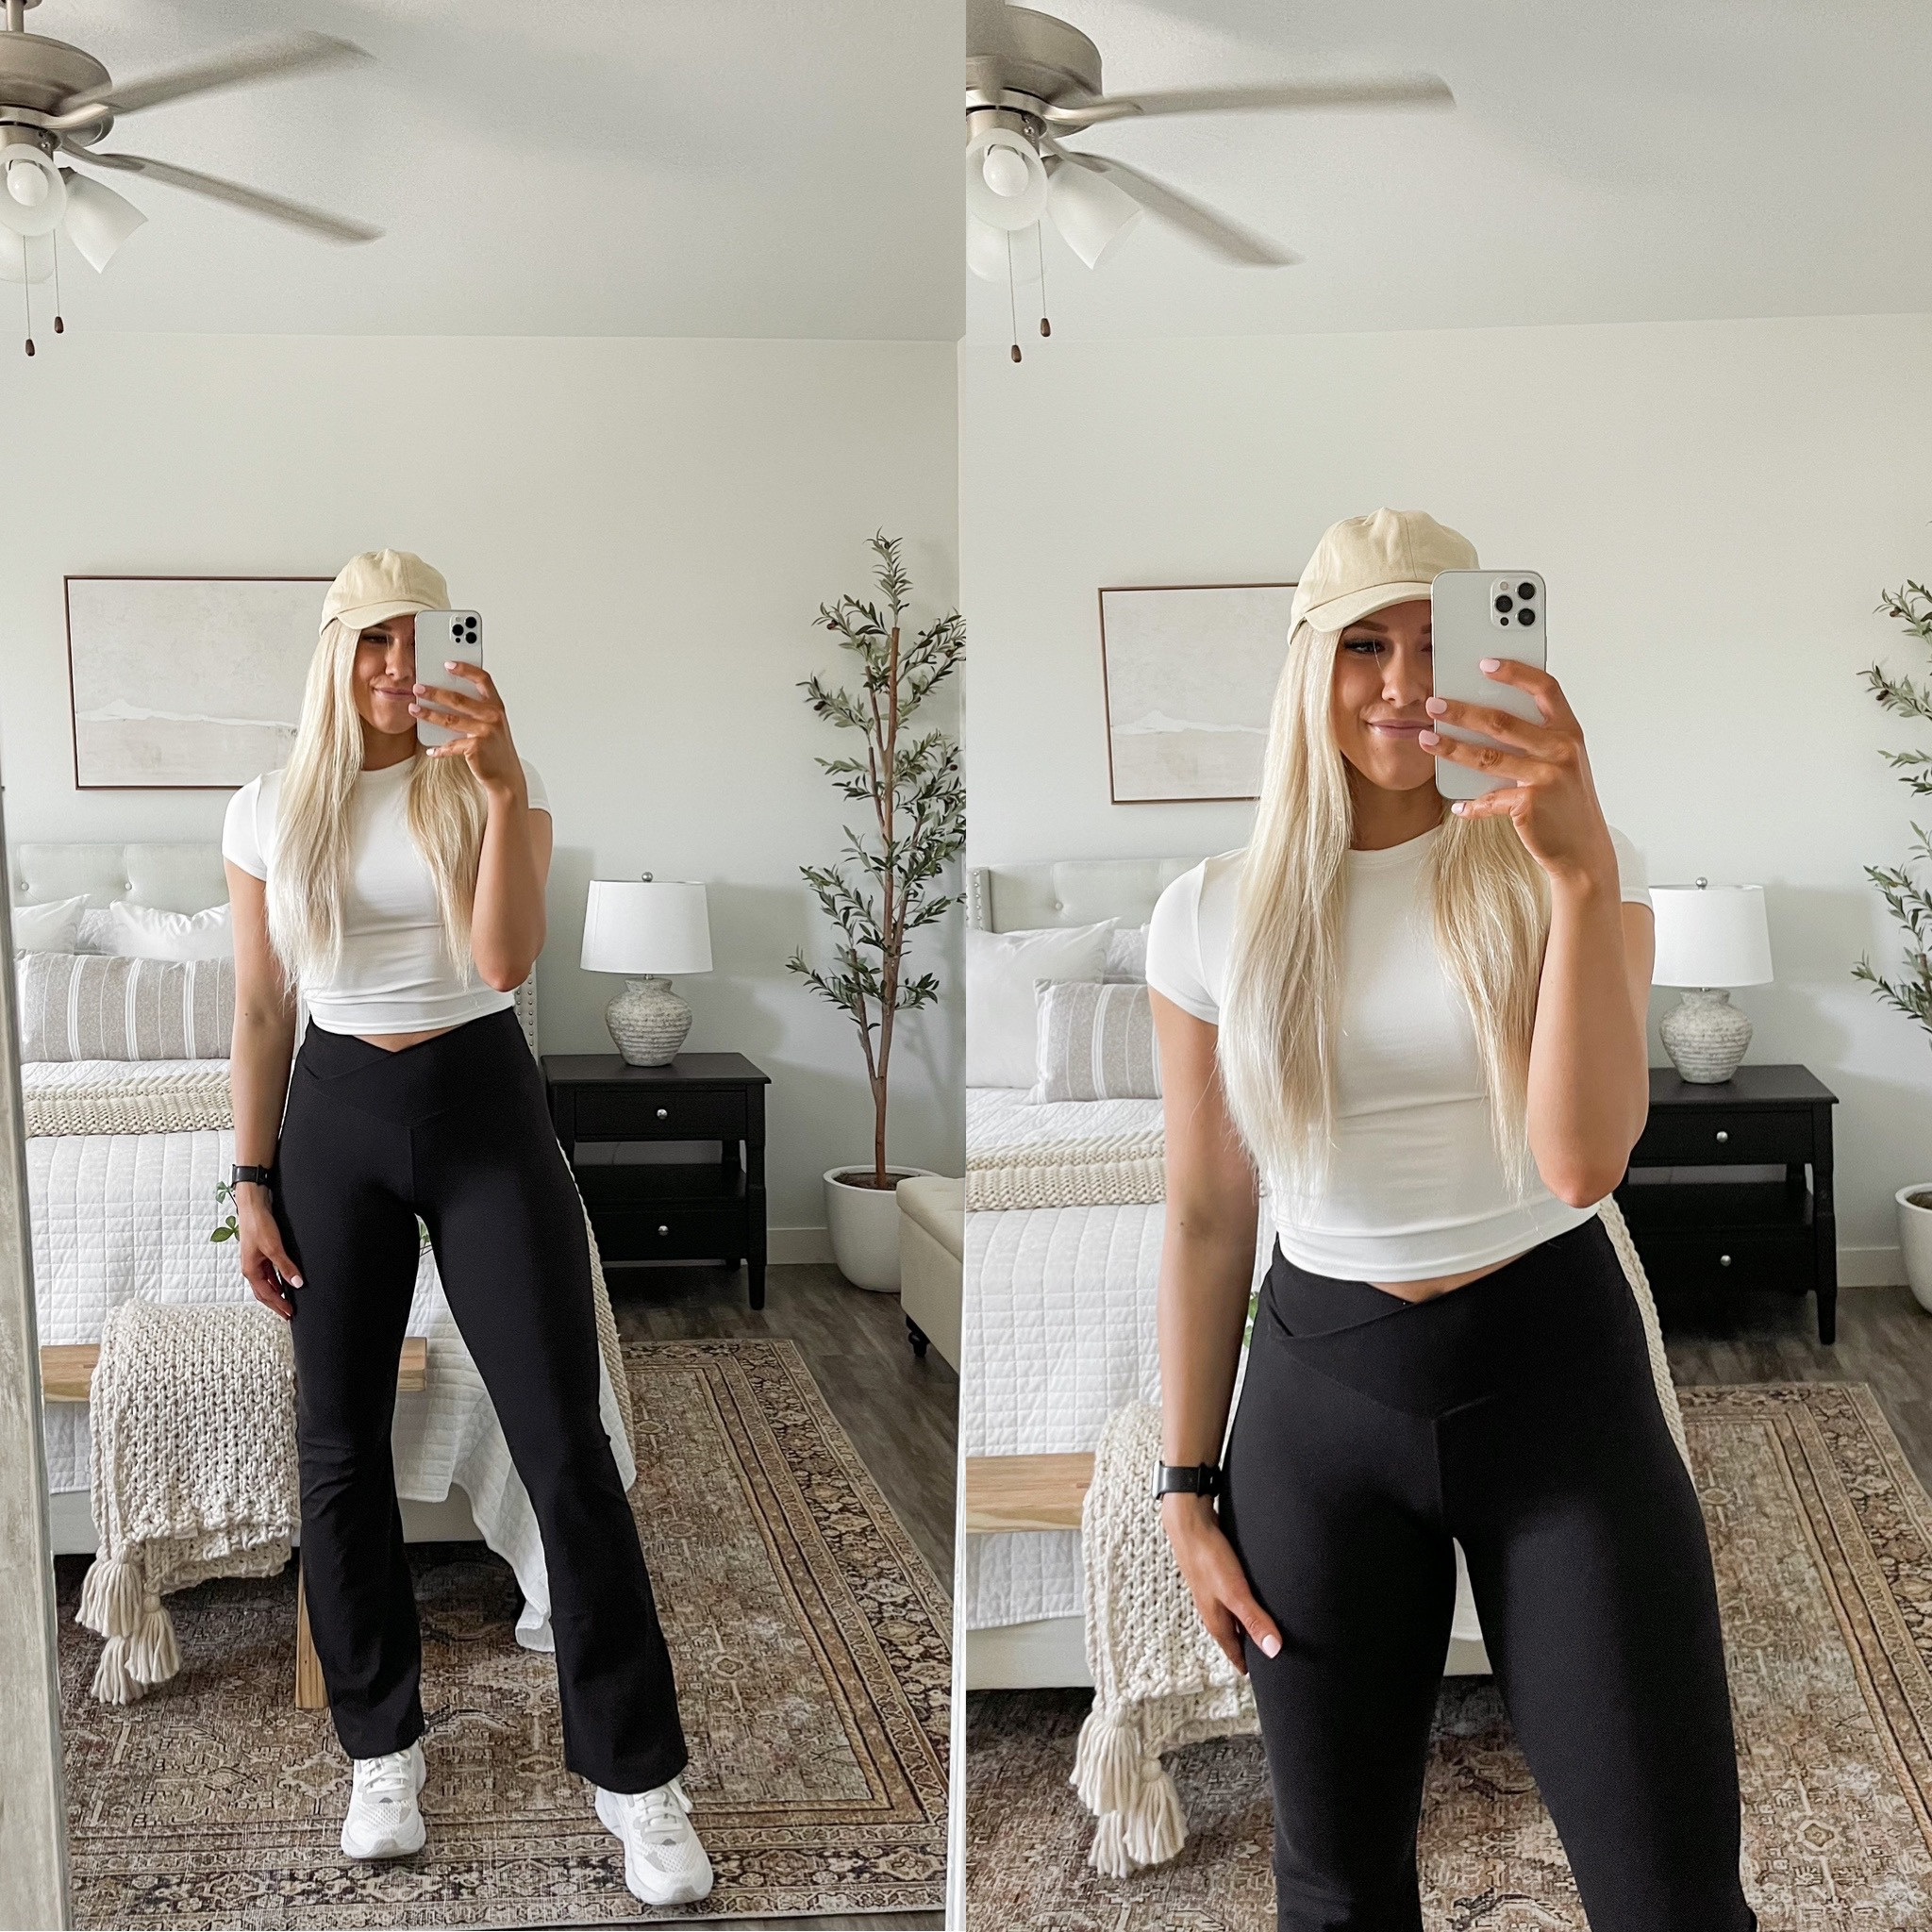 Review of TOPYOGAS Women's Casual Bootleg Yoga Pants V